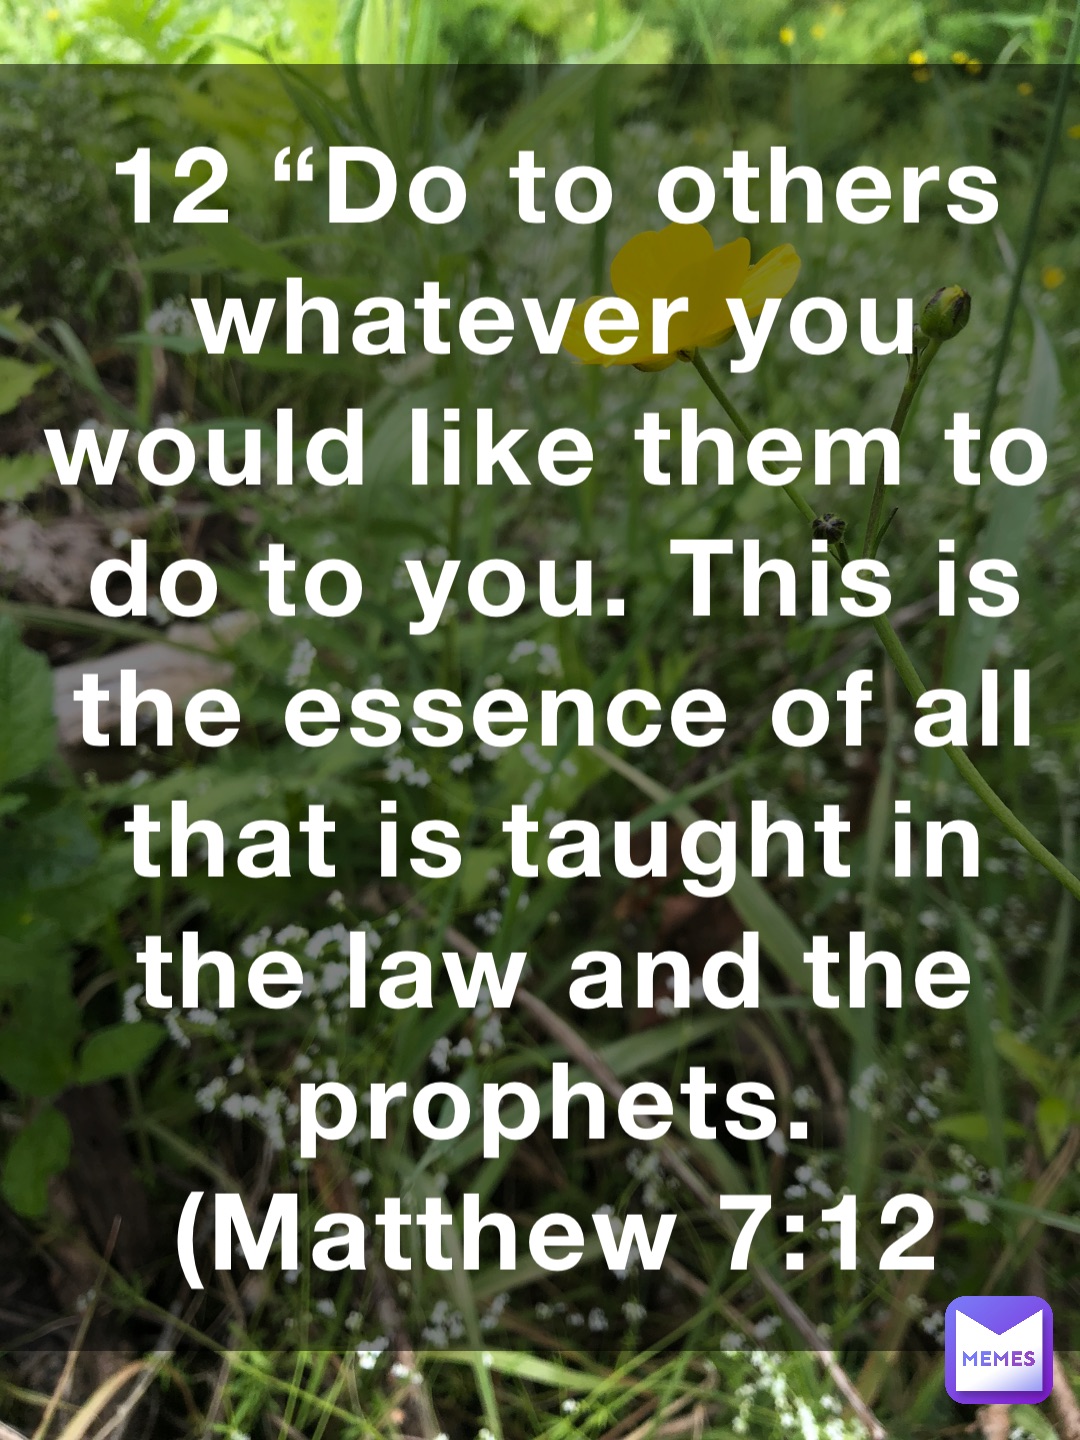 12 “Do to others whatever you would like them to do to you. This is the essence of all that is taught in the law and the prophets. (‭‭‭Matthew‬ ‭7‬‬:‭12‬ ‭NLT‬‬)